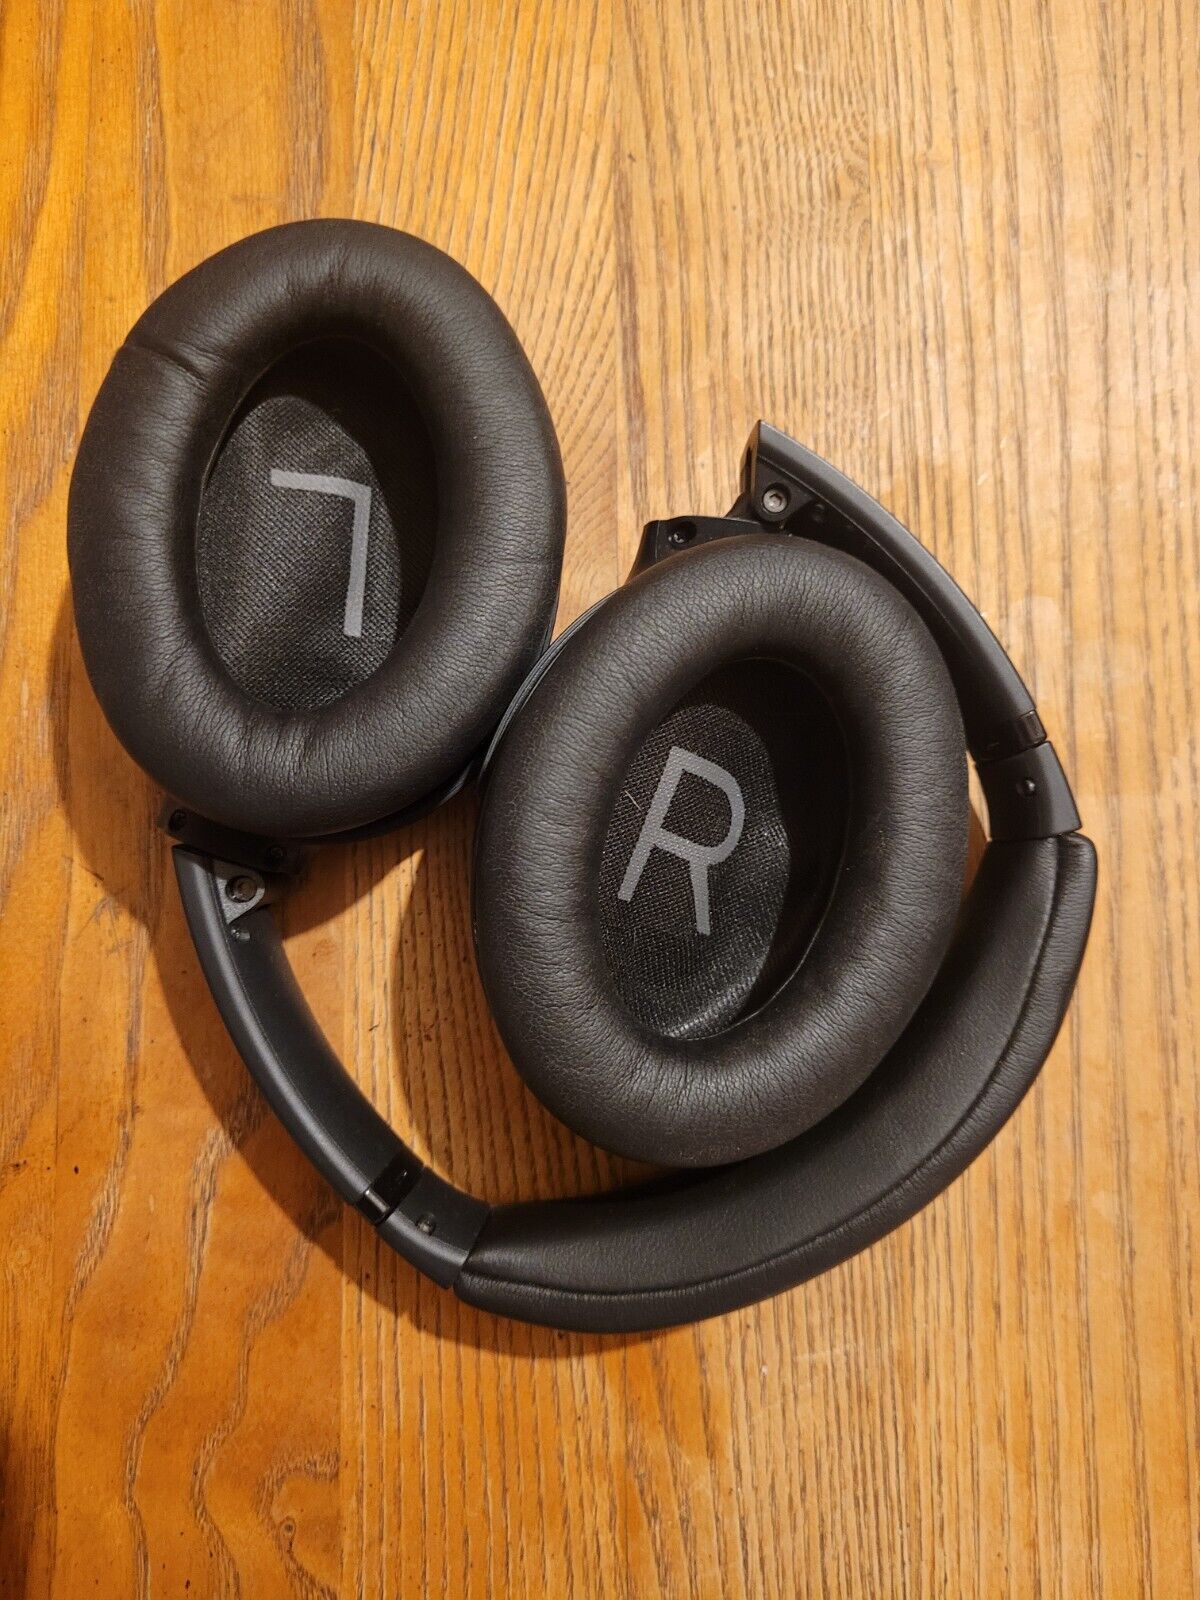 Bose QuietComfort 45 Noise Cancelling Headphones Used Only 4 Times.